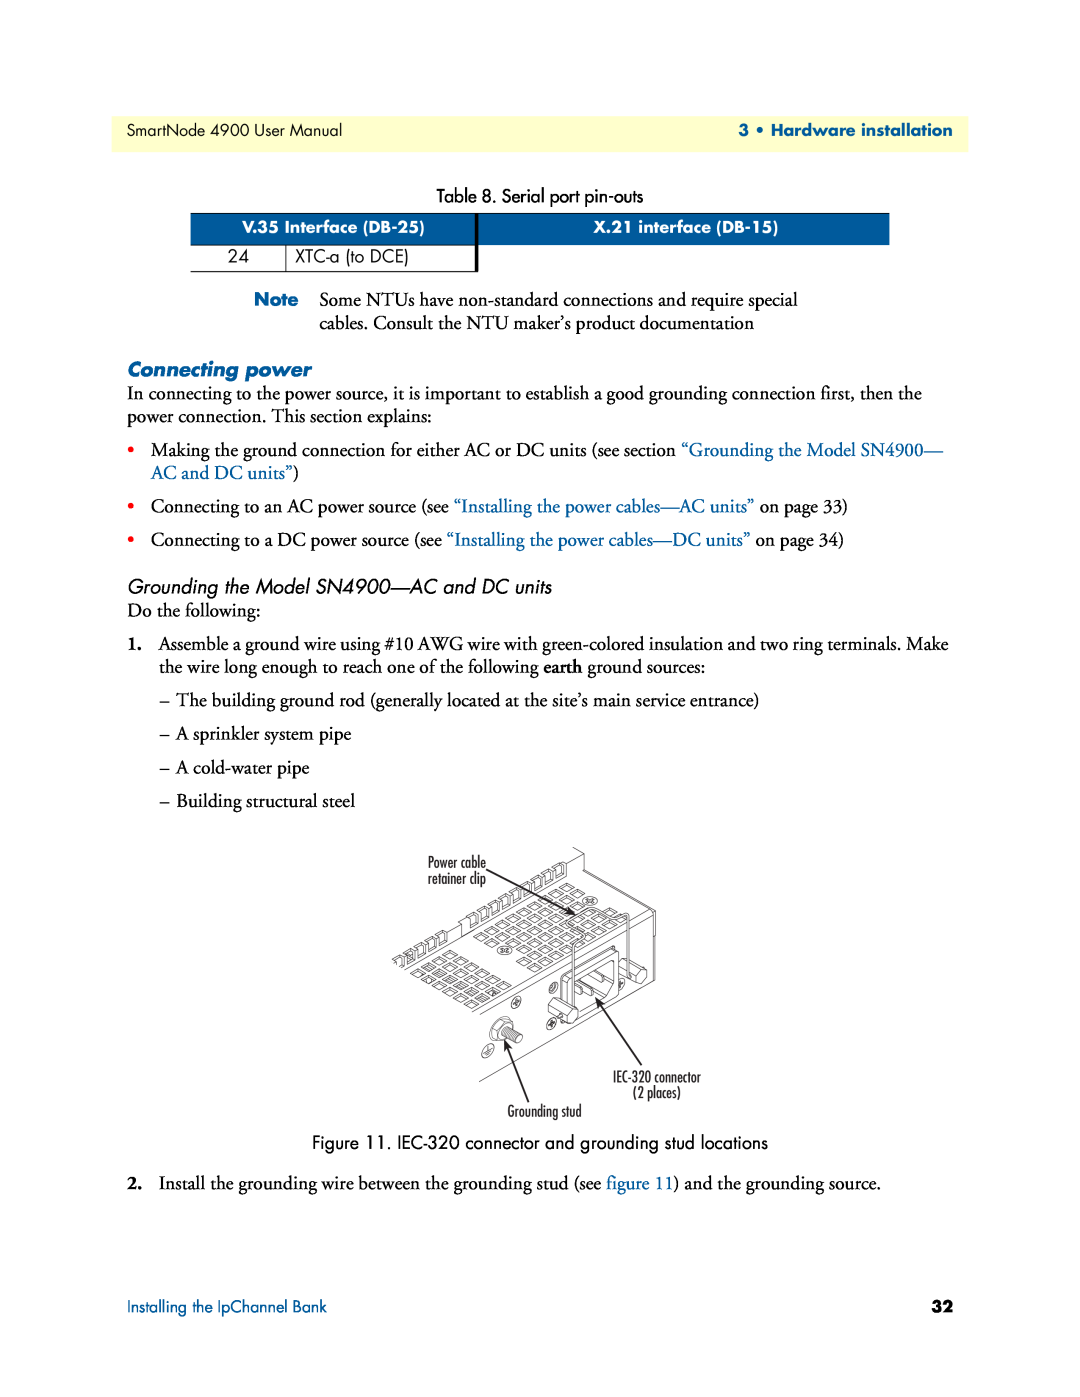 Patton electronic user manual Connecting power, Grounding the Model SN4900-AC and DC units 